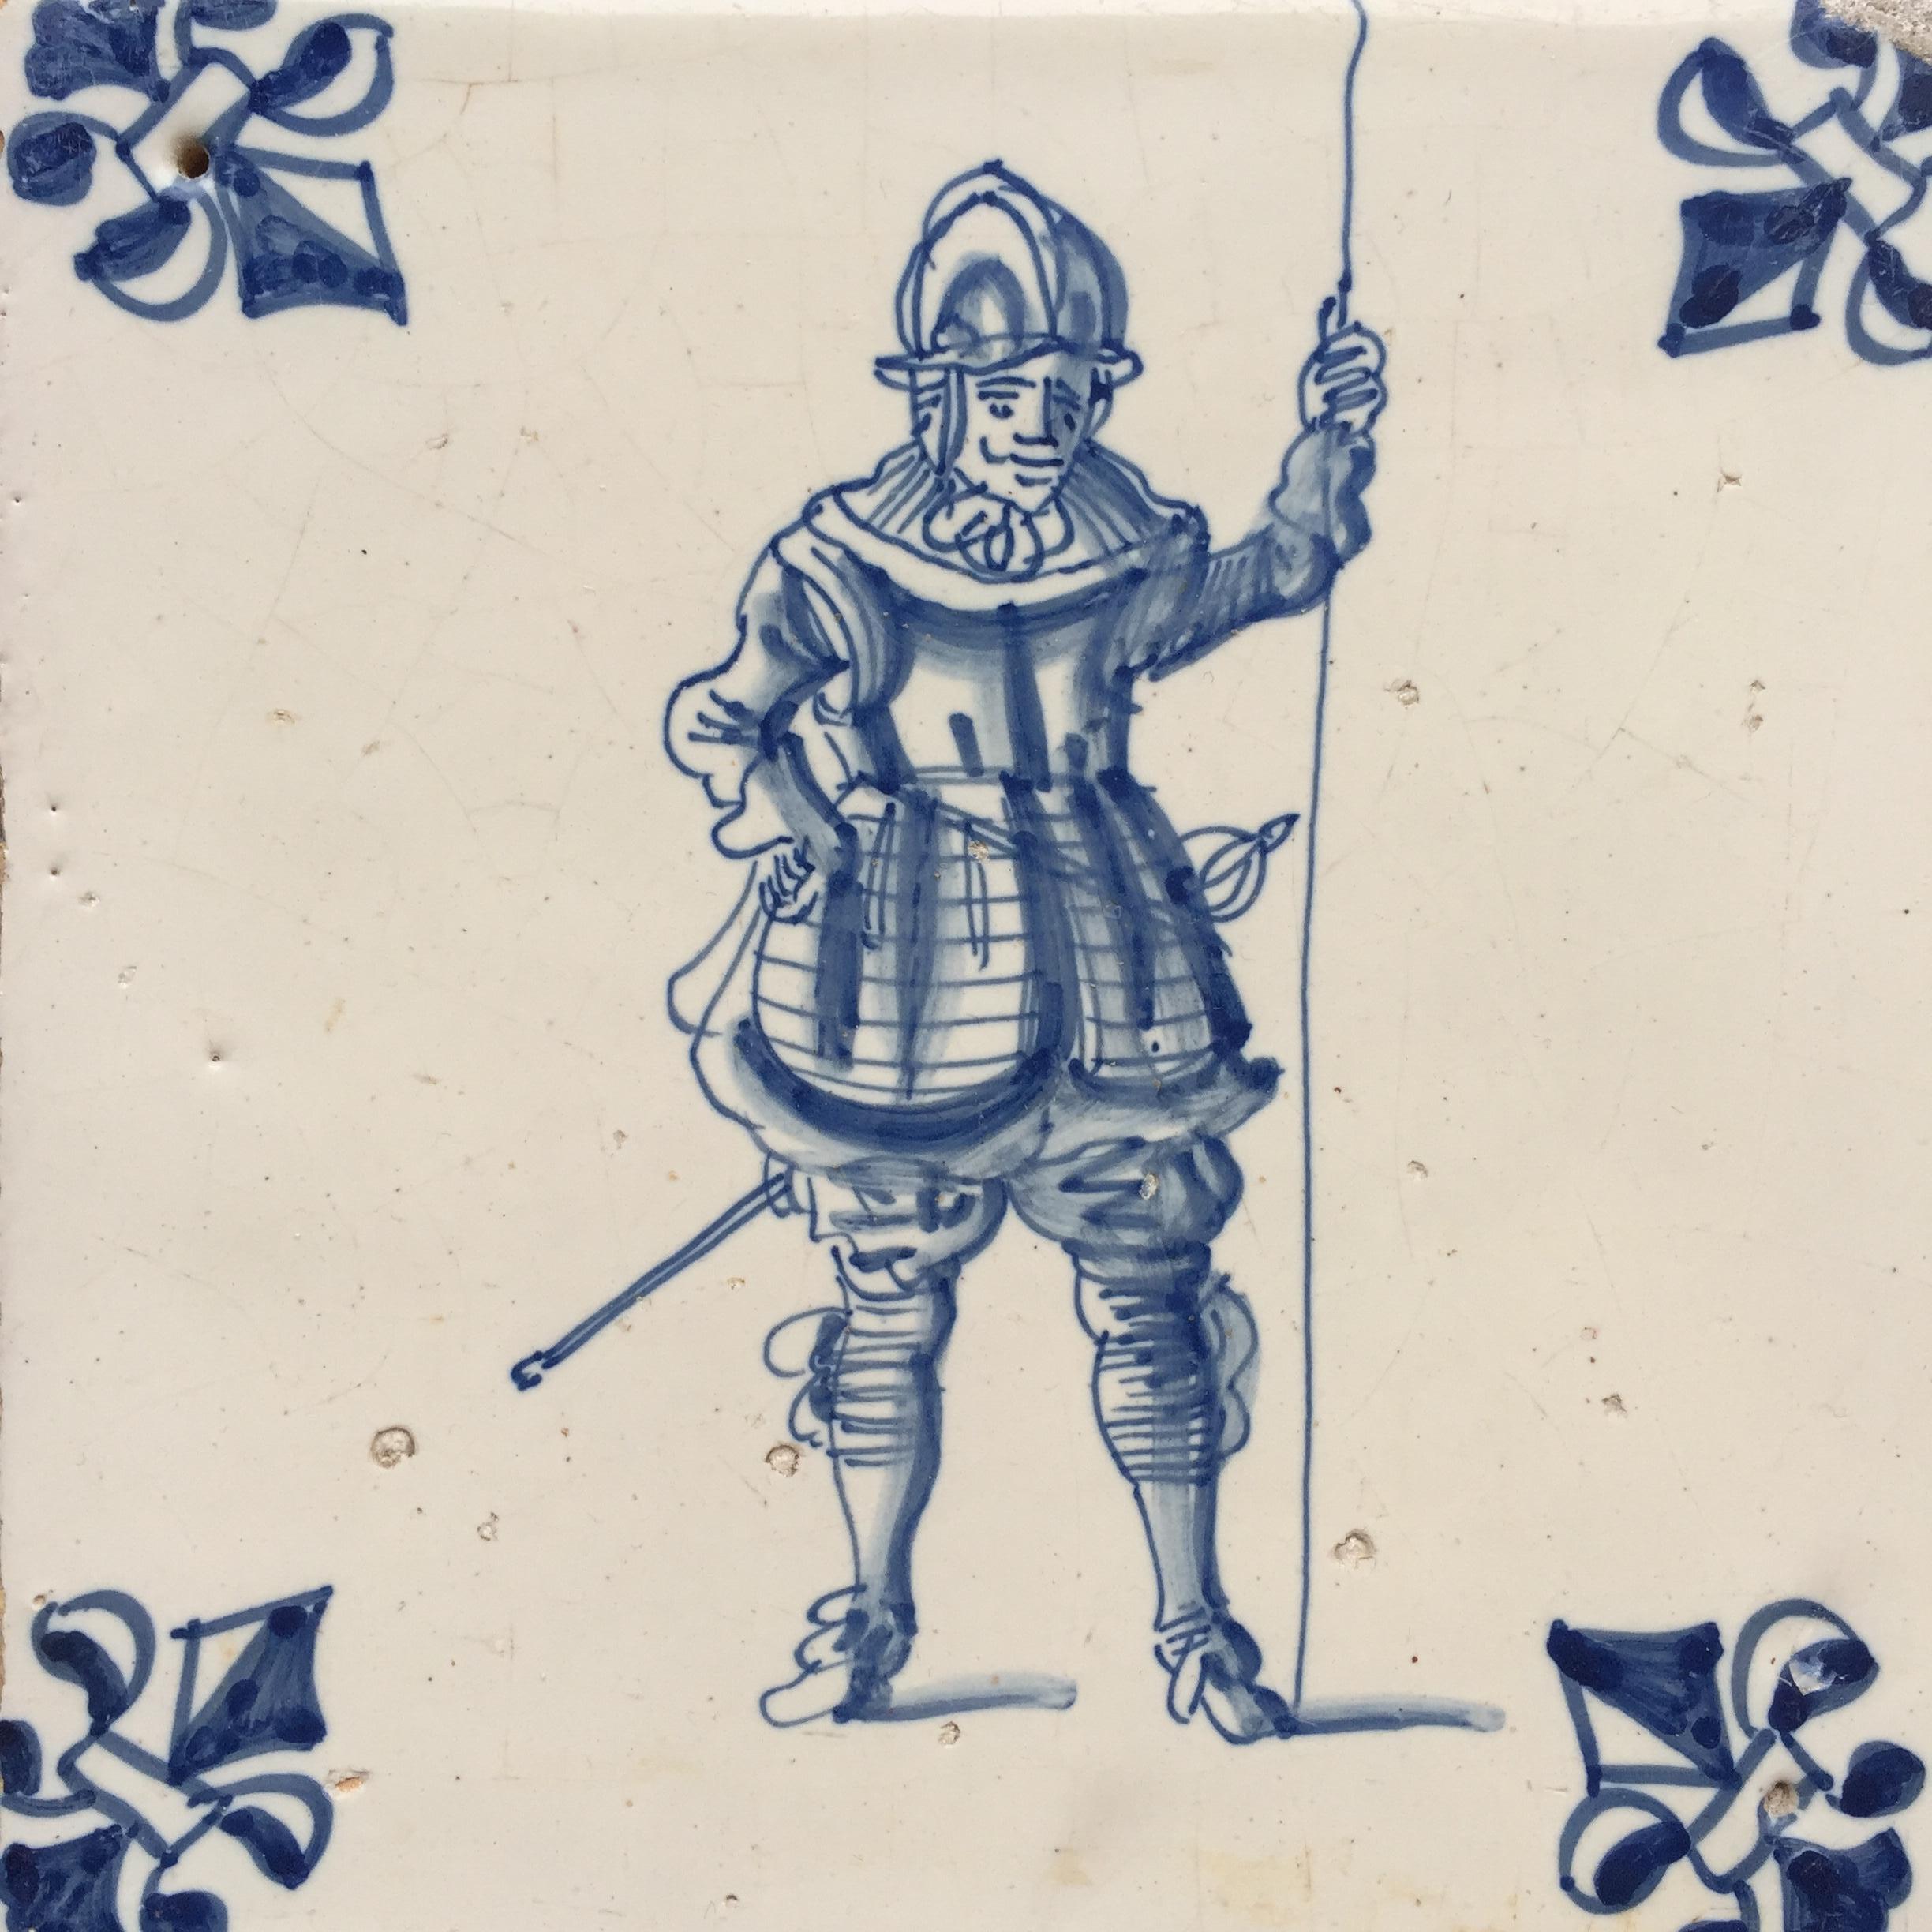 The Netherlands
Amsterdam
Circa 1625 – 1650

A blue and white Dutch tile with a decoration of a Dutch or Spanish soldier from the period of the 80 Years War.
The decoration of this tile is very detailed and we can beautifully see the details in his